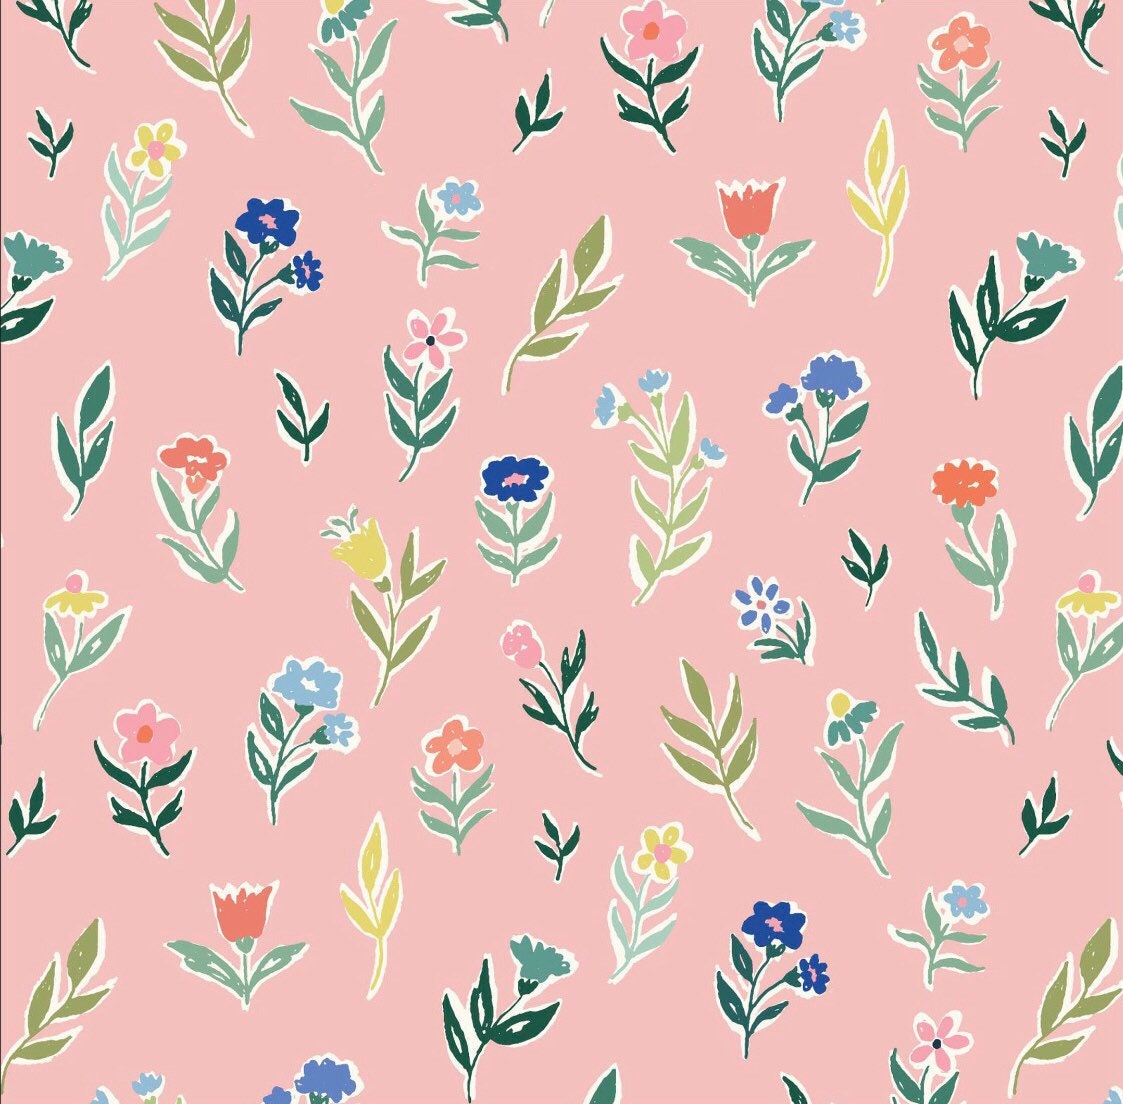 Daisy - Perennial Collection by Cassidy Demkov for Cloud9 Fabrics - 100% Organic Cotton